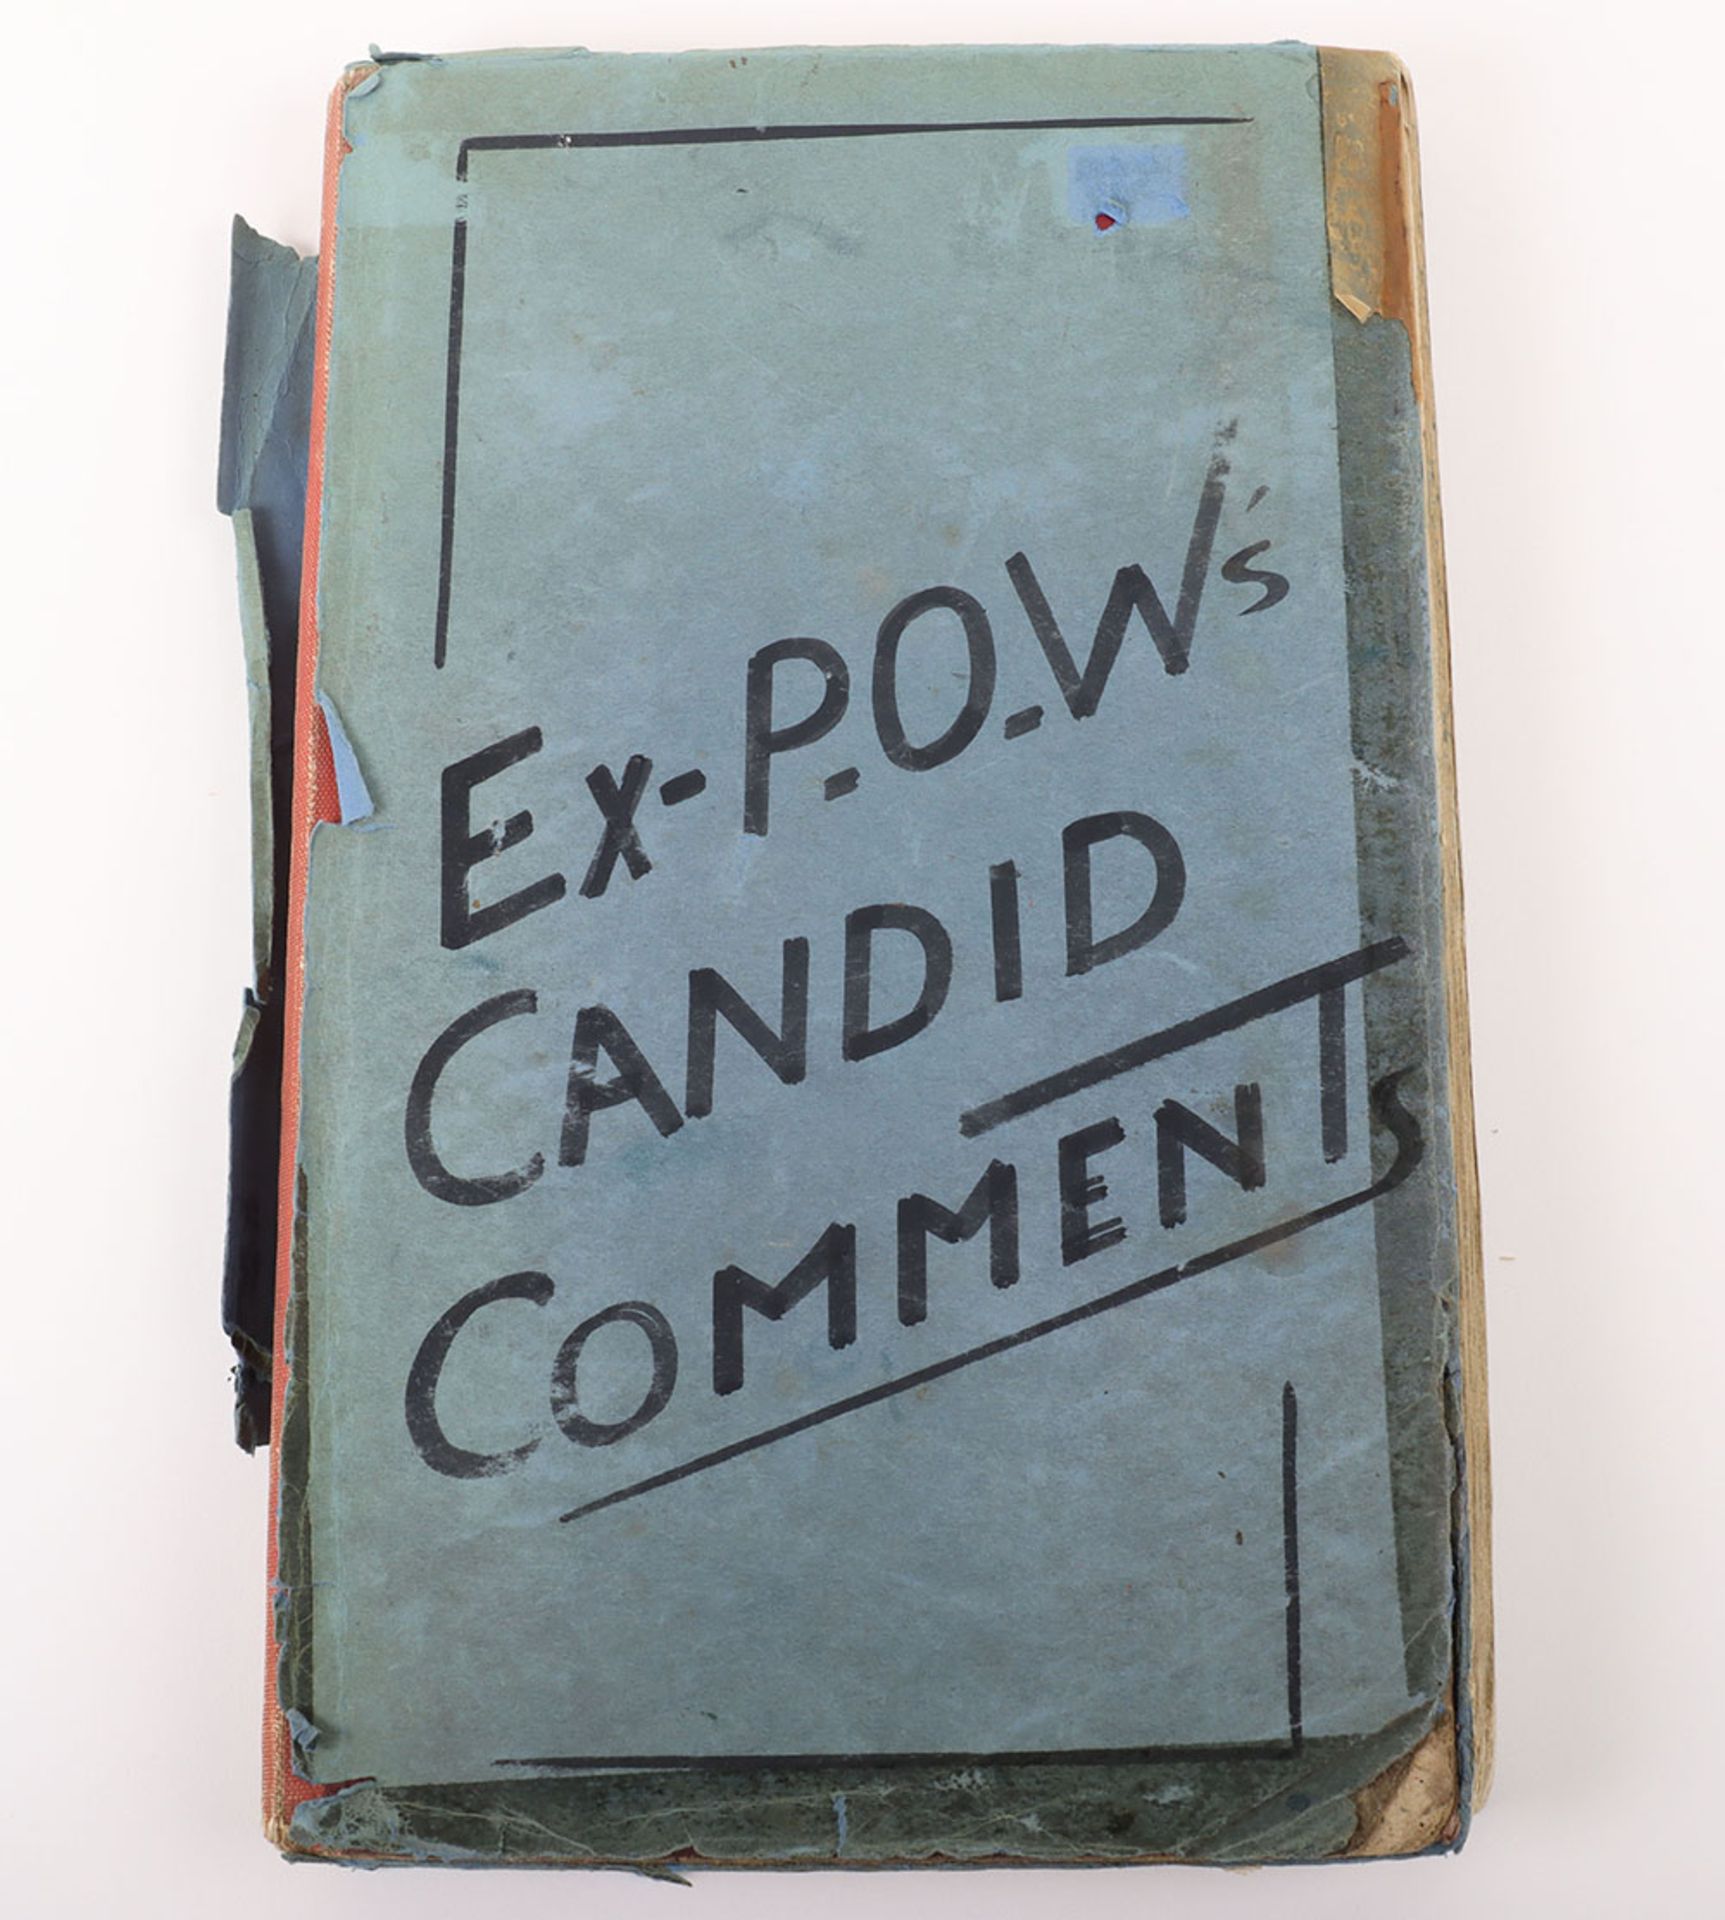 Fascinating book of " Ex-POW's Candid Comments"